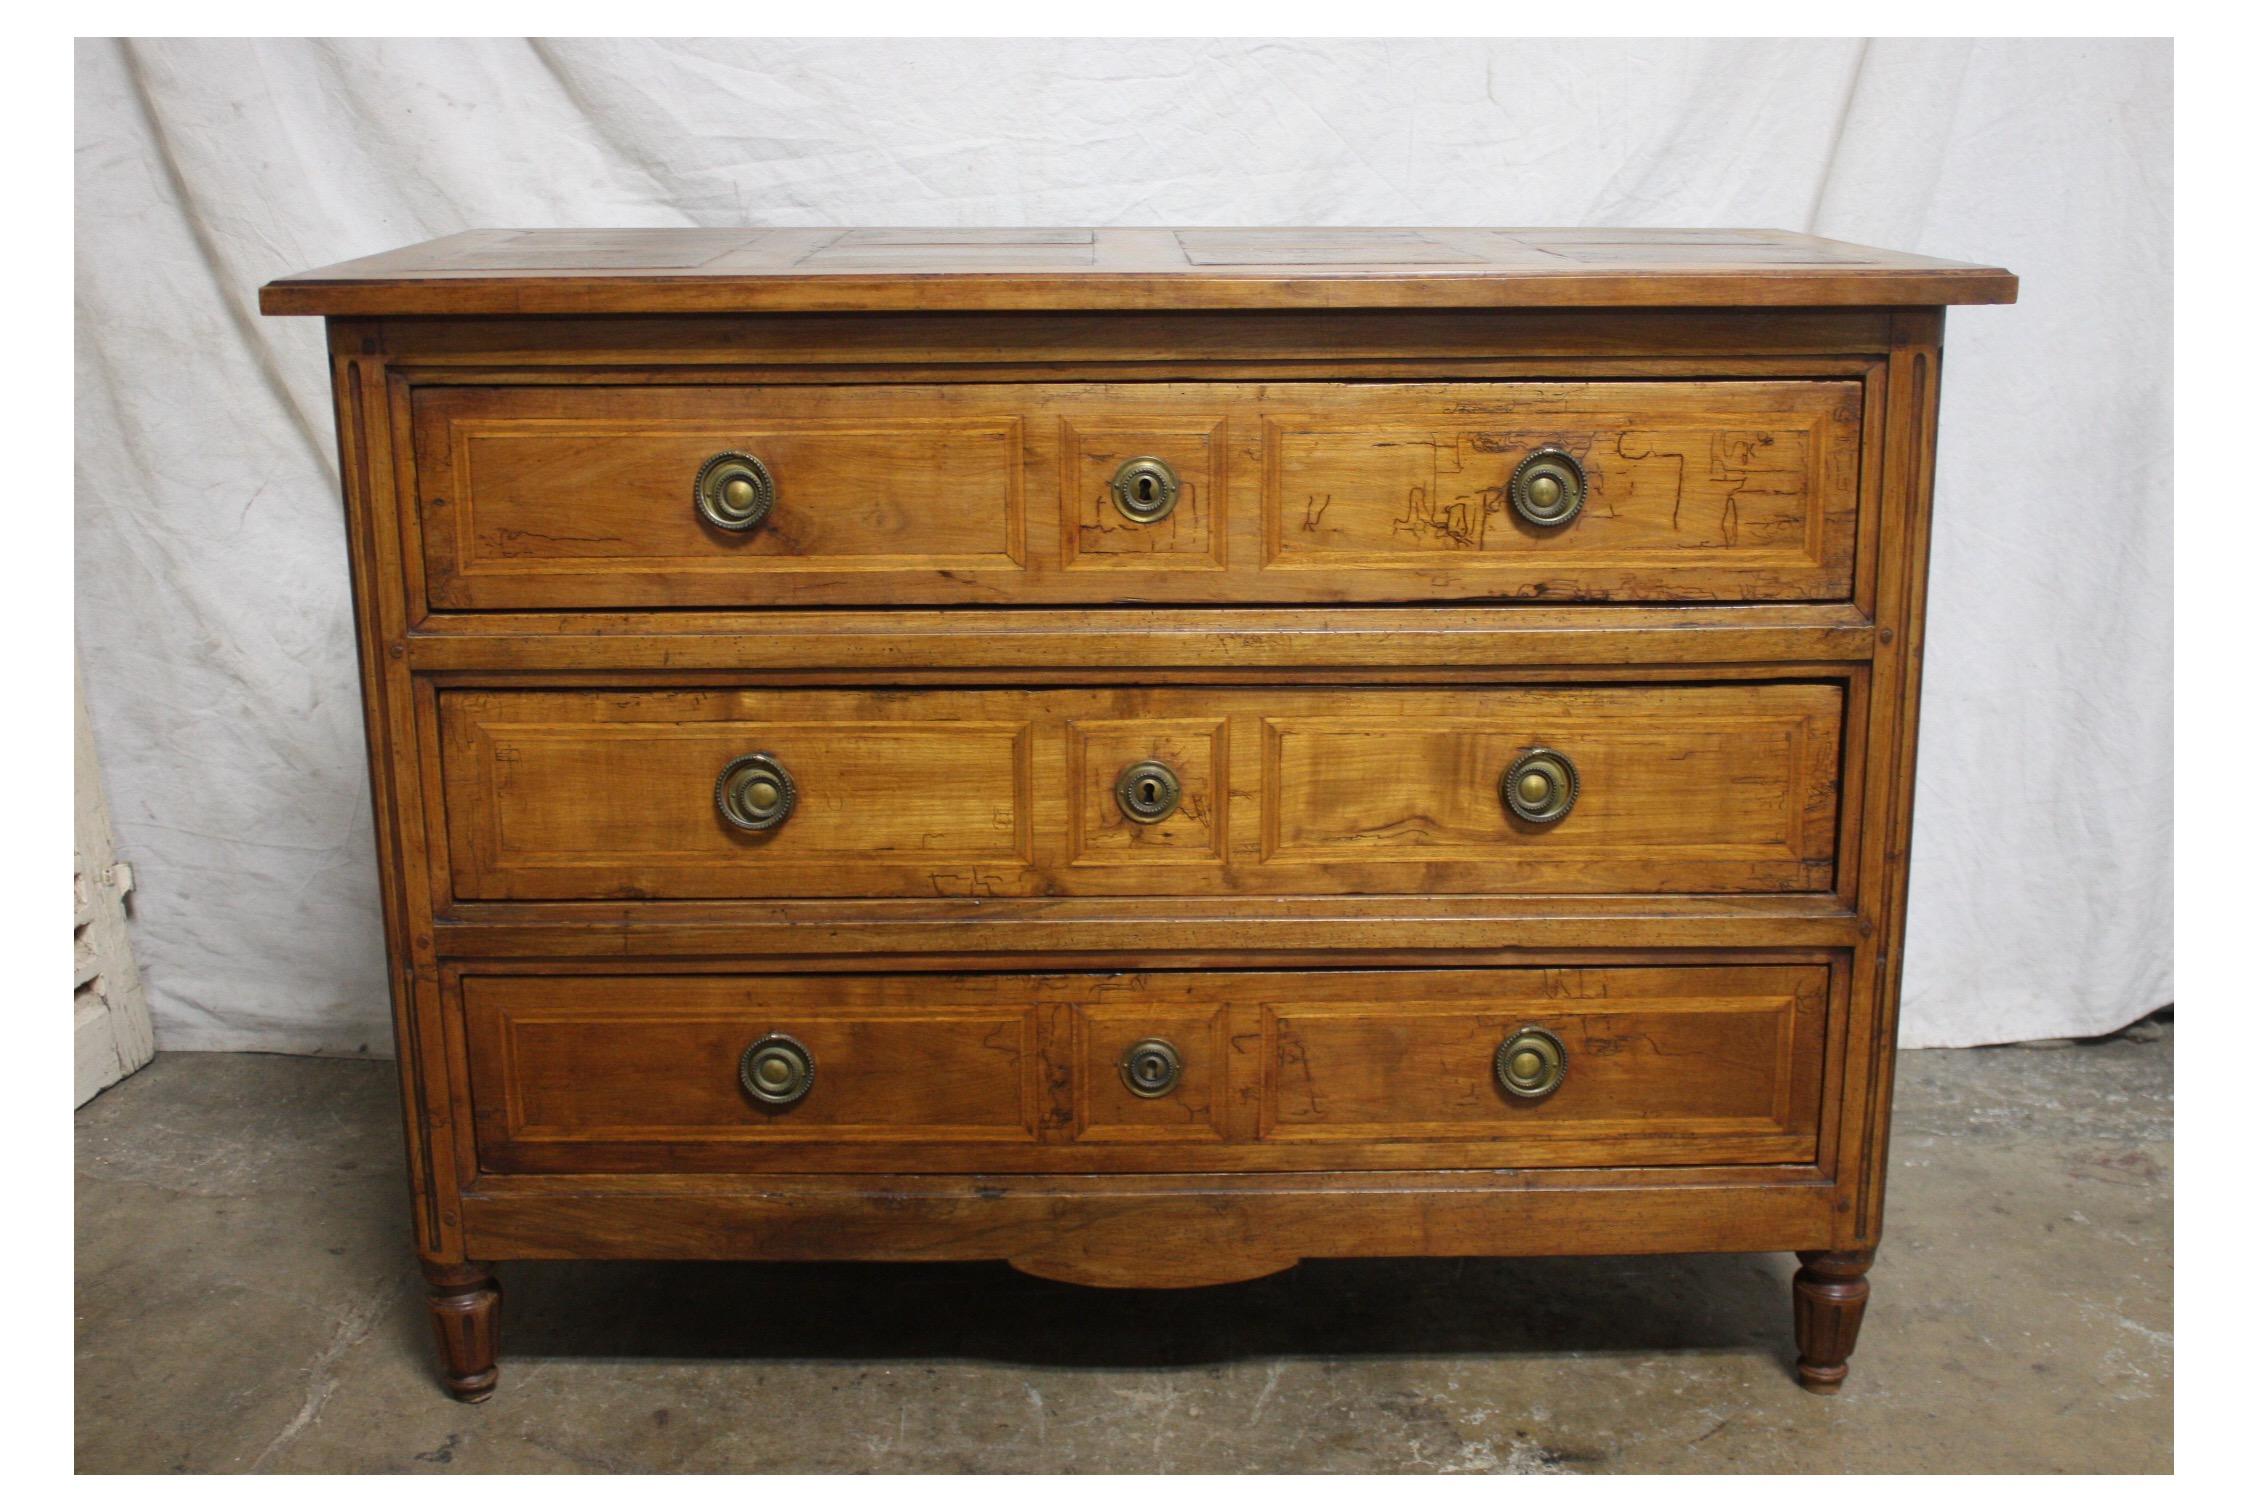 Beautiful French 18th century commode in walnut with a parqueted wood top.